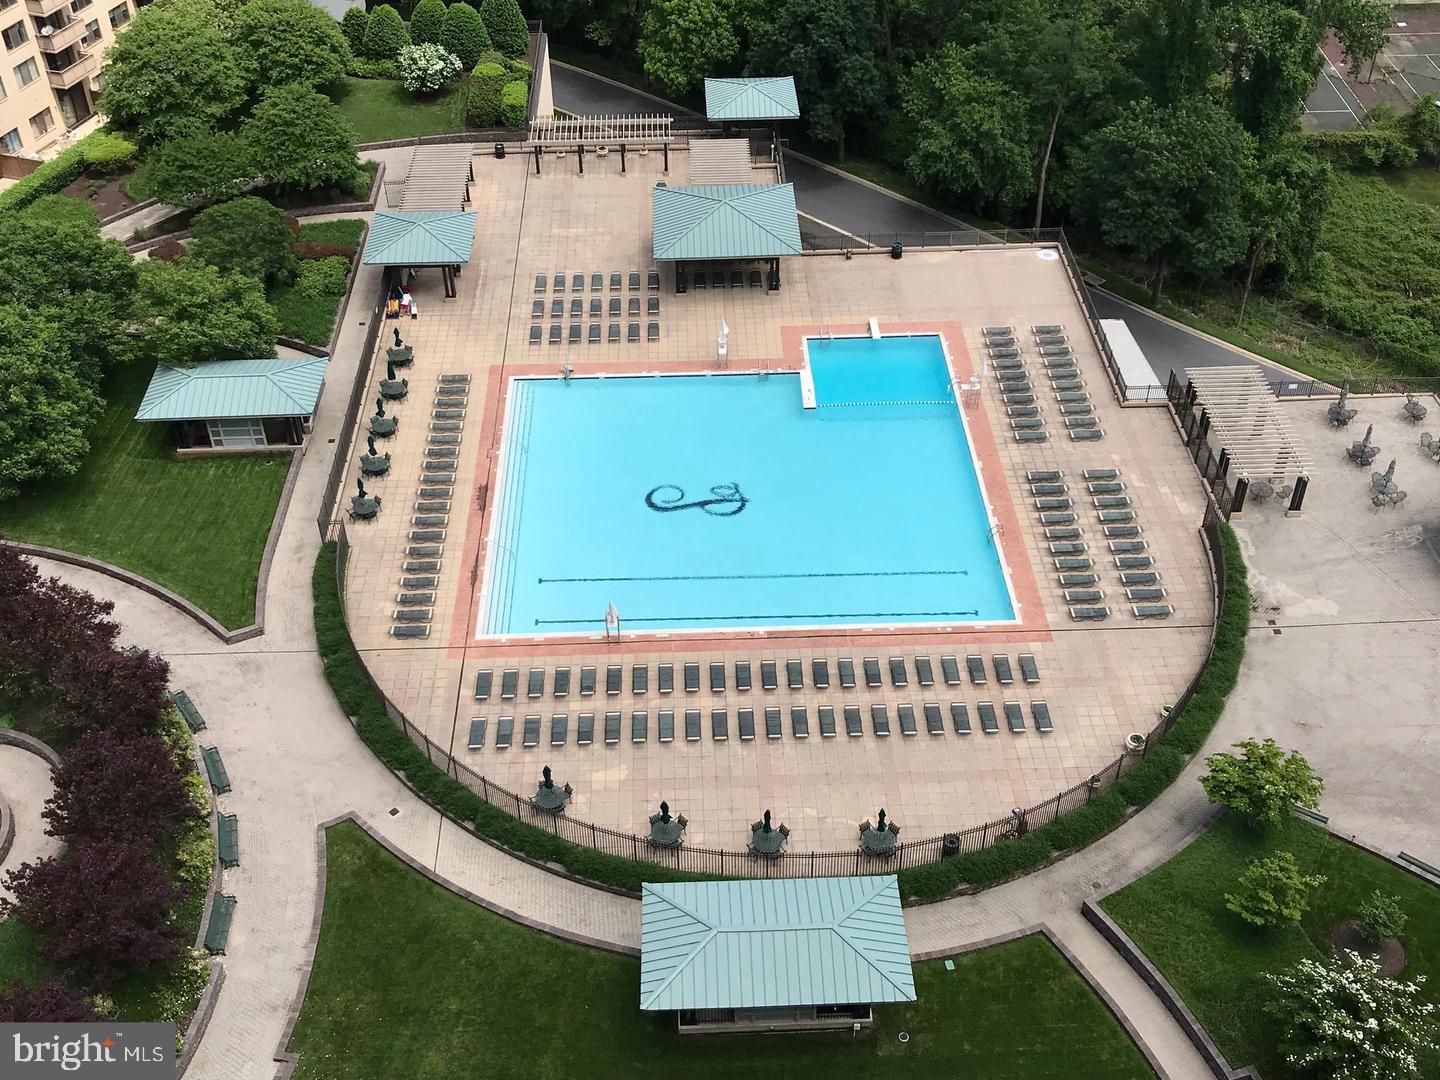 an aerial view of a house with swimming pool and deck